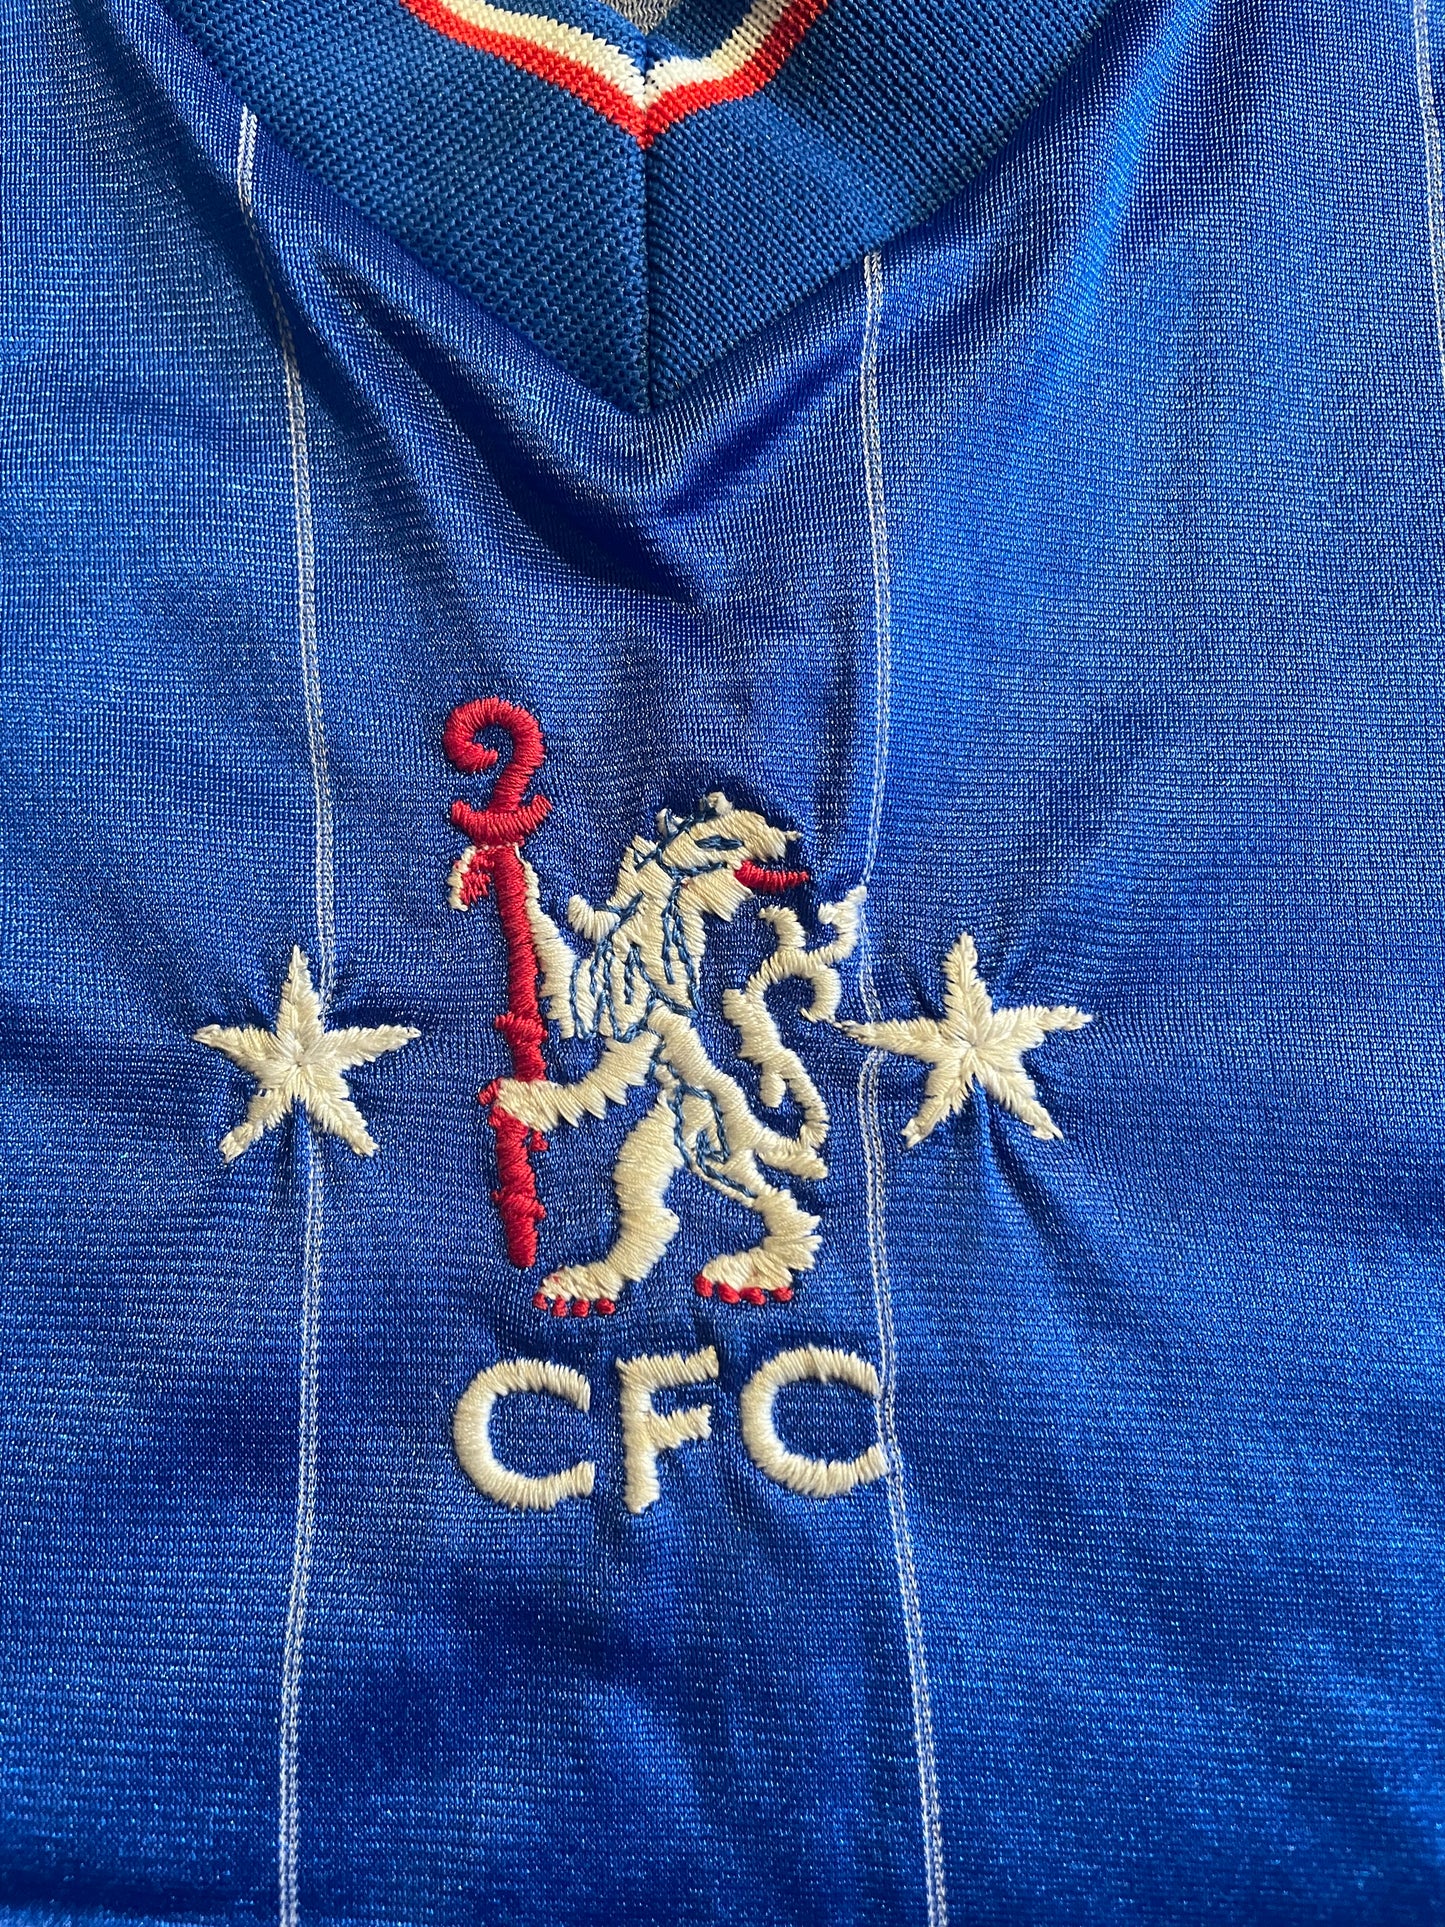 Chelsea 1981 Home Shirt (excellent) Childs. Size label worn...8 to 10 years? Height 17 inches